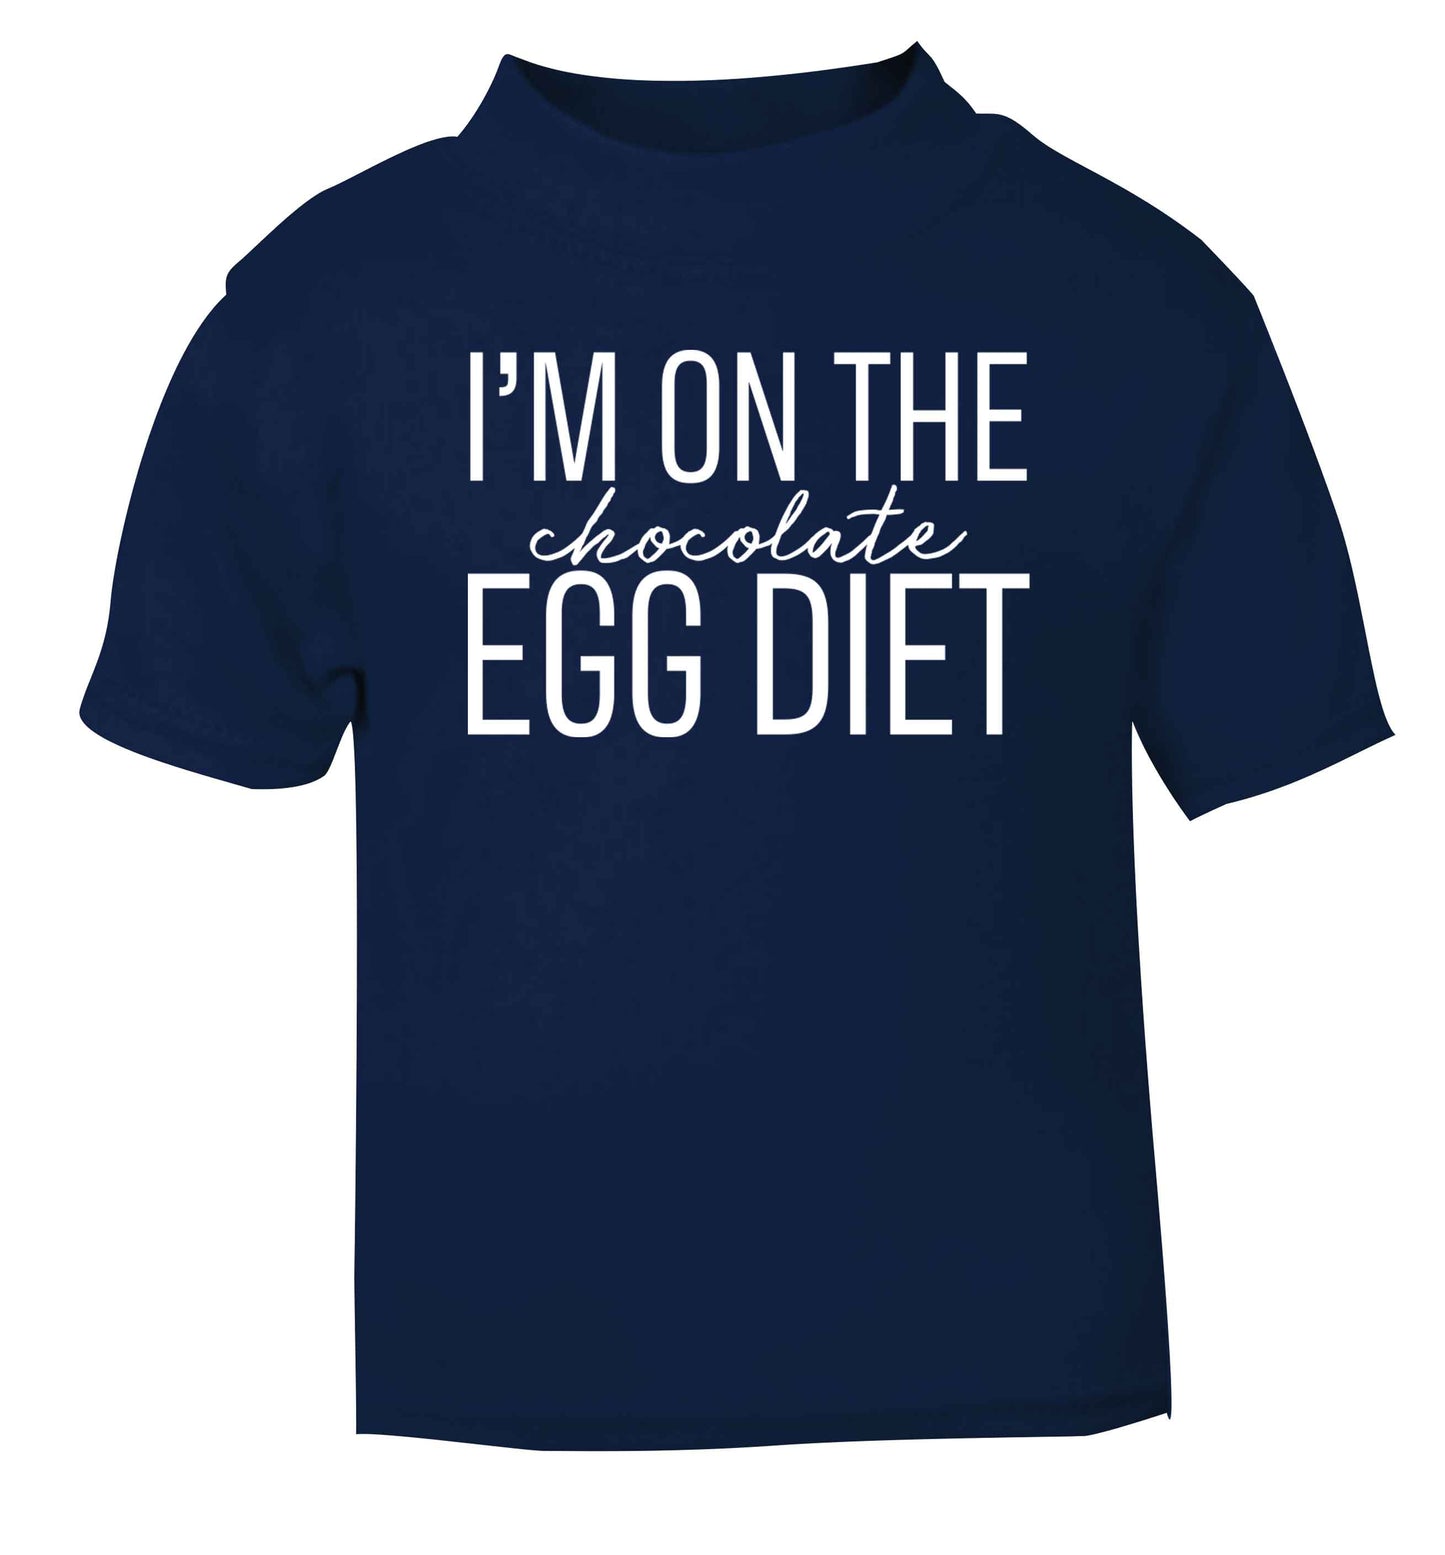 I'm on the chocolate egg diet navy baby toddler Tshirt 2 Years